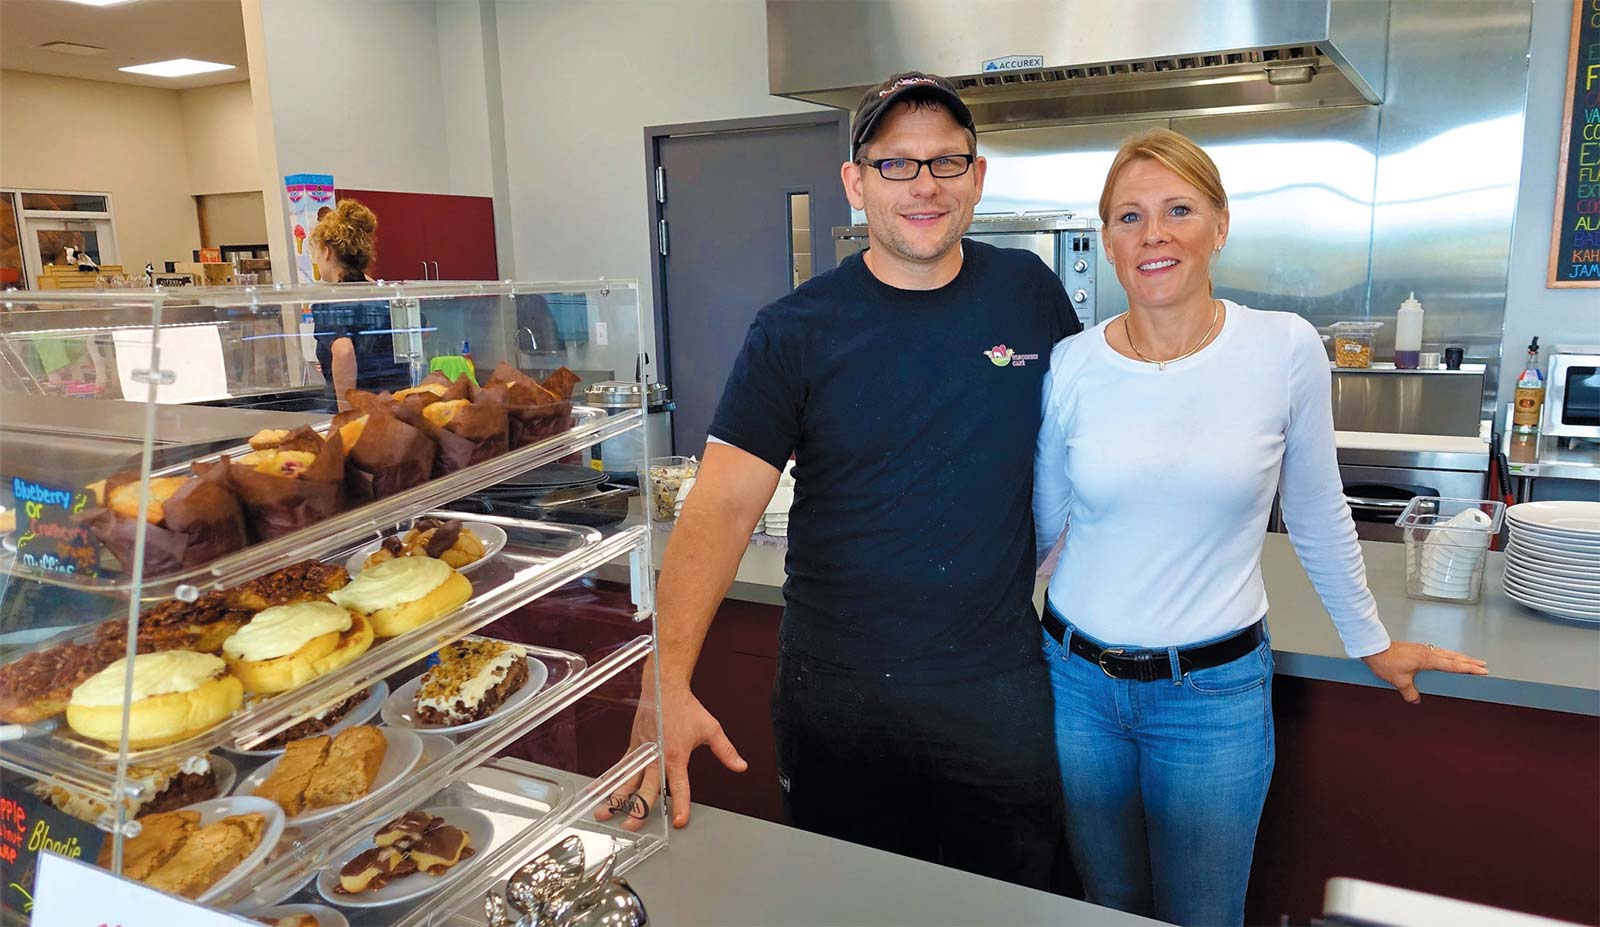 Operators of the Wisconsin Café, Aaron and Jennifer Sloma showcase menu items made in Wisconsin.